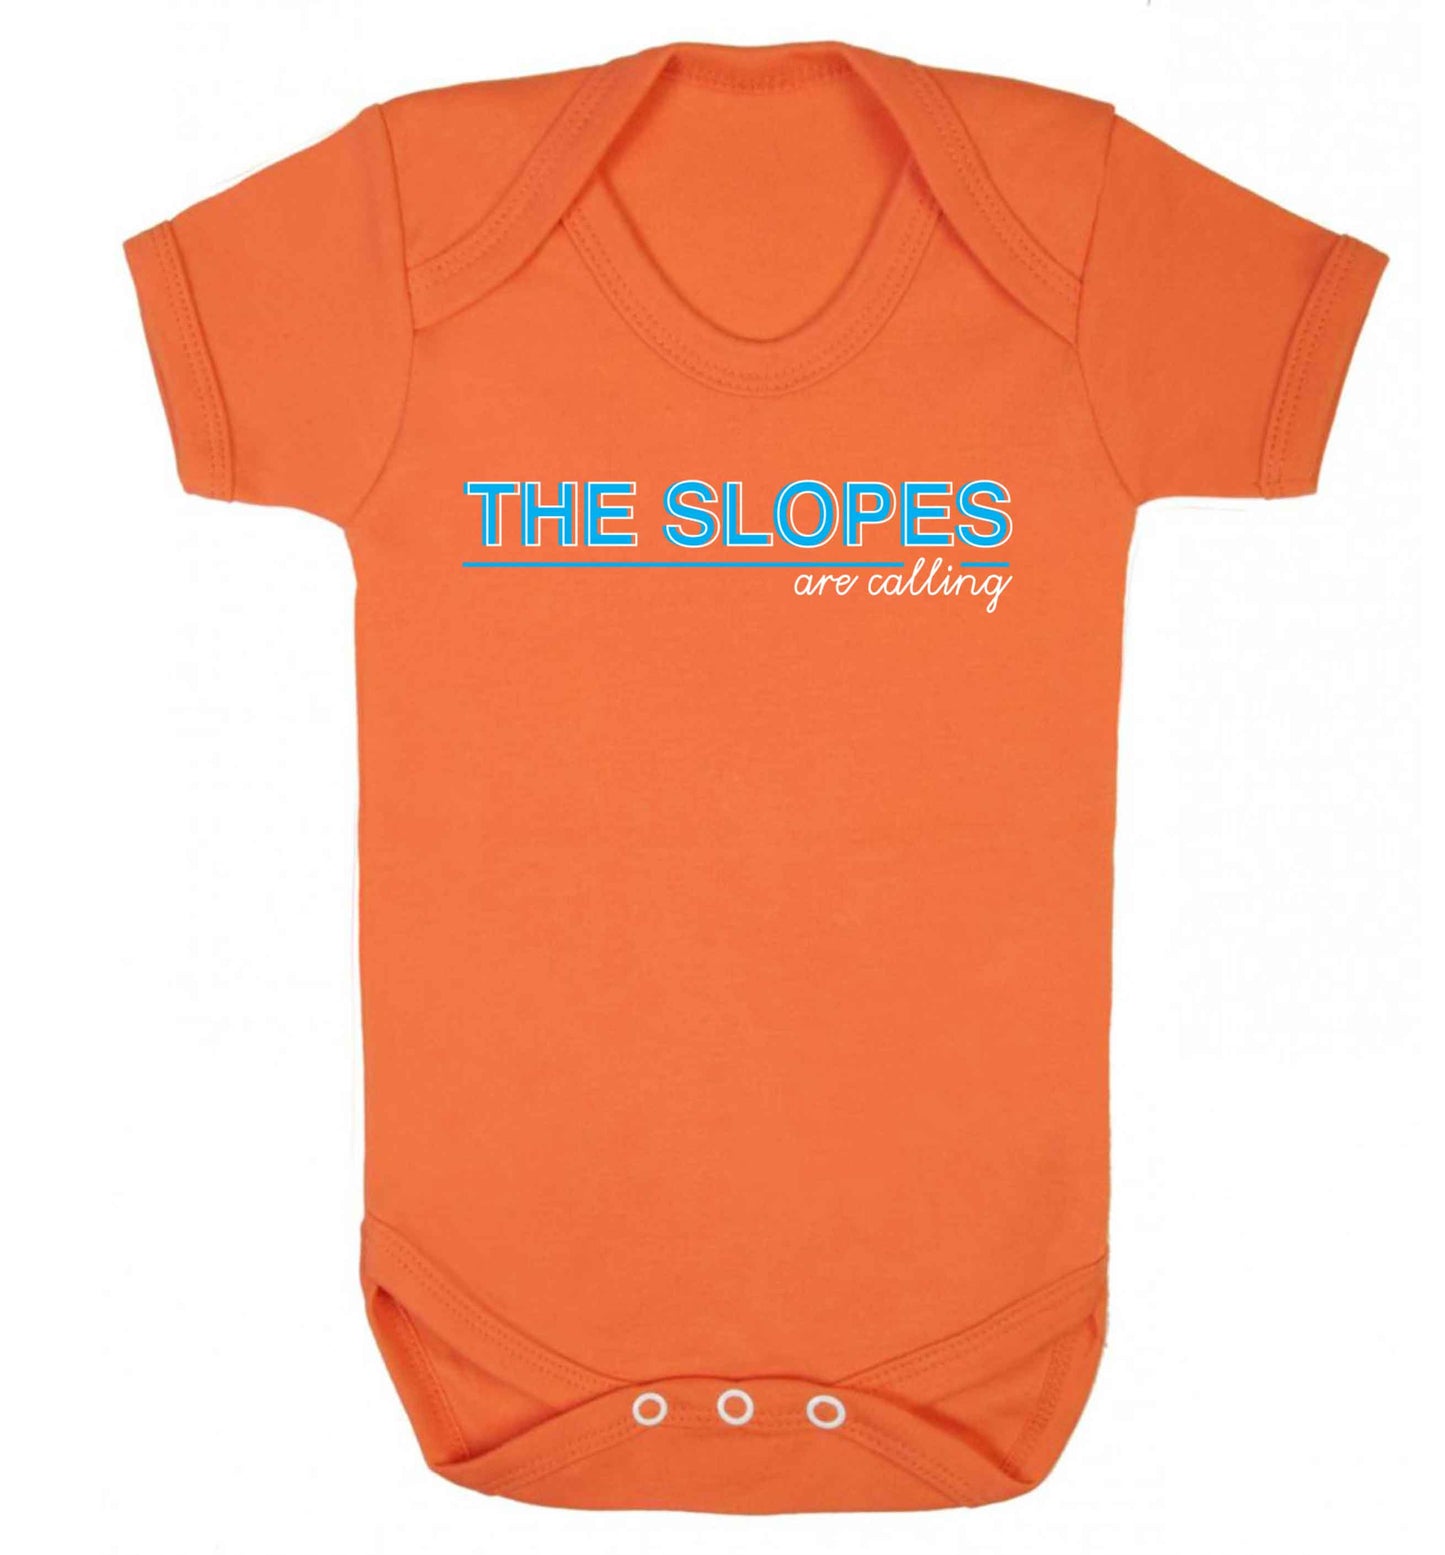 The slopes are calling Baby Vest orange 18-24 months